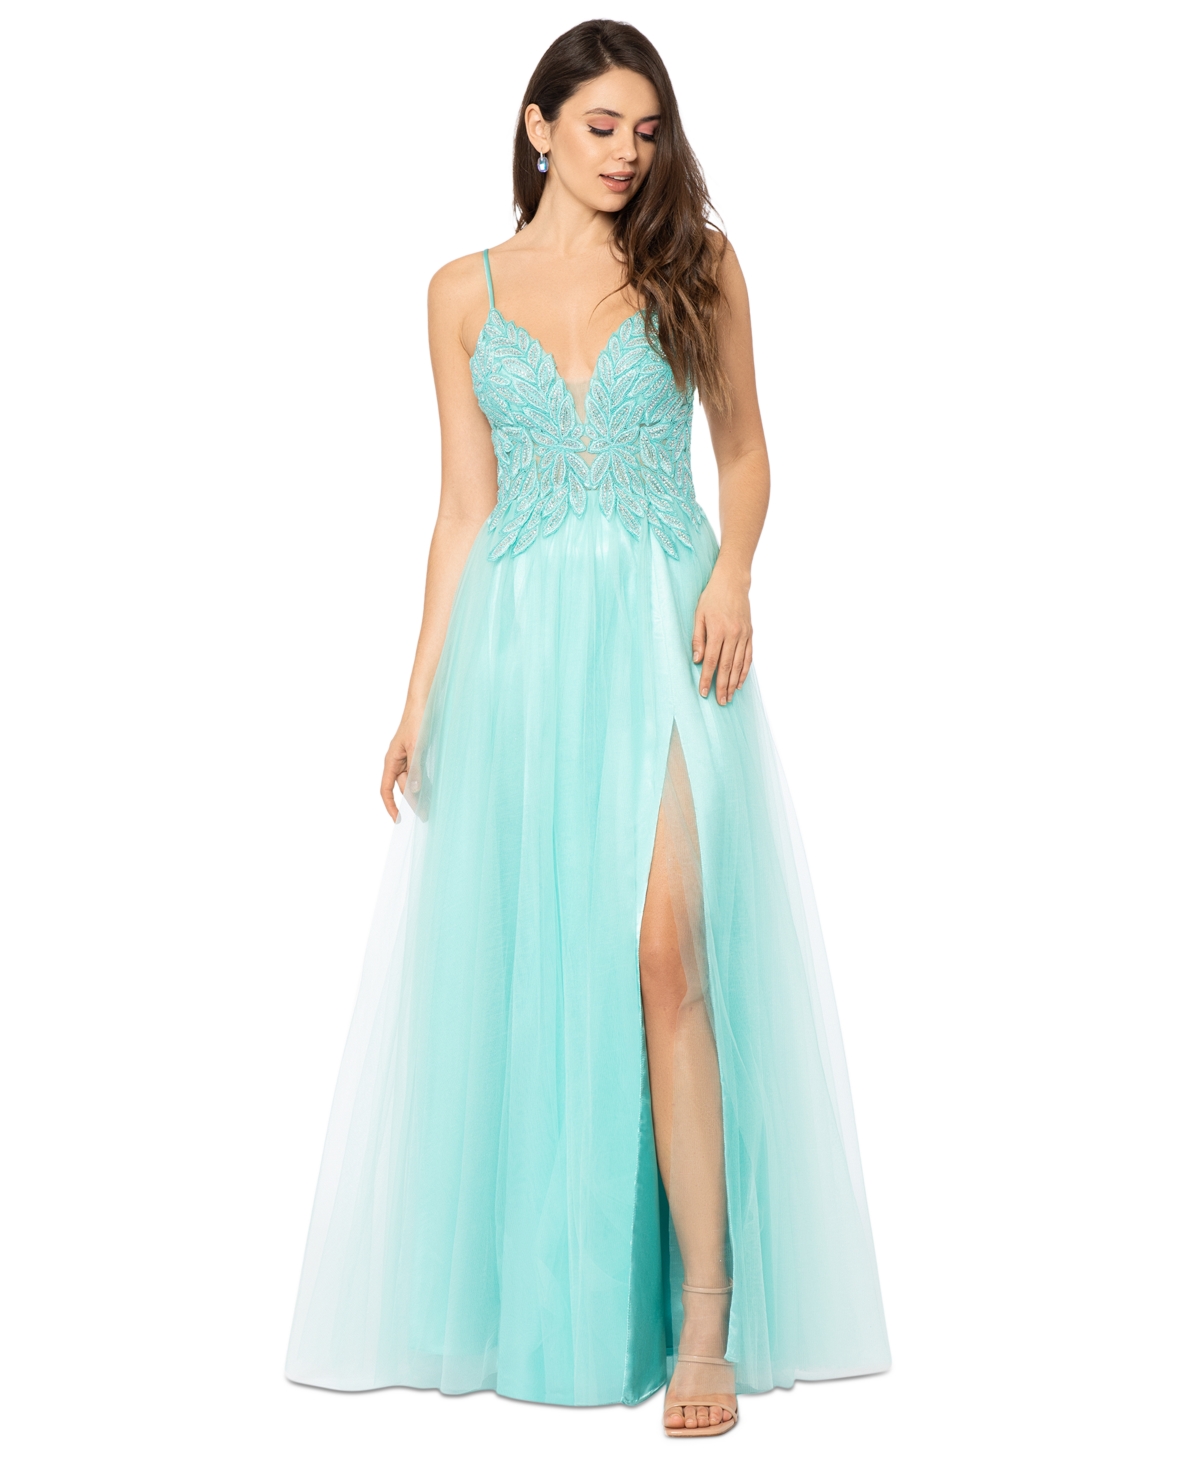 Blondie Nites Juniors' Mesh Embroidered-Bodice Ball Gown